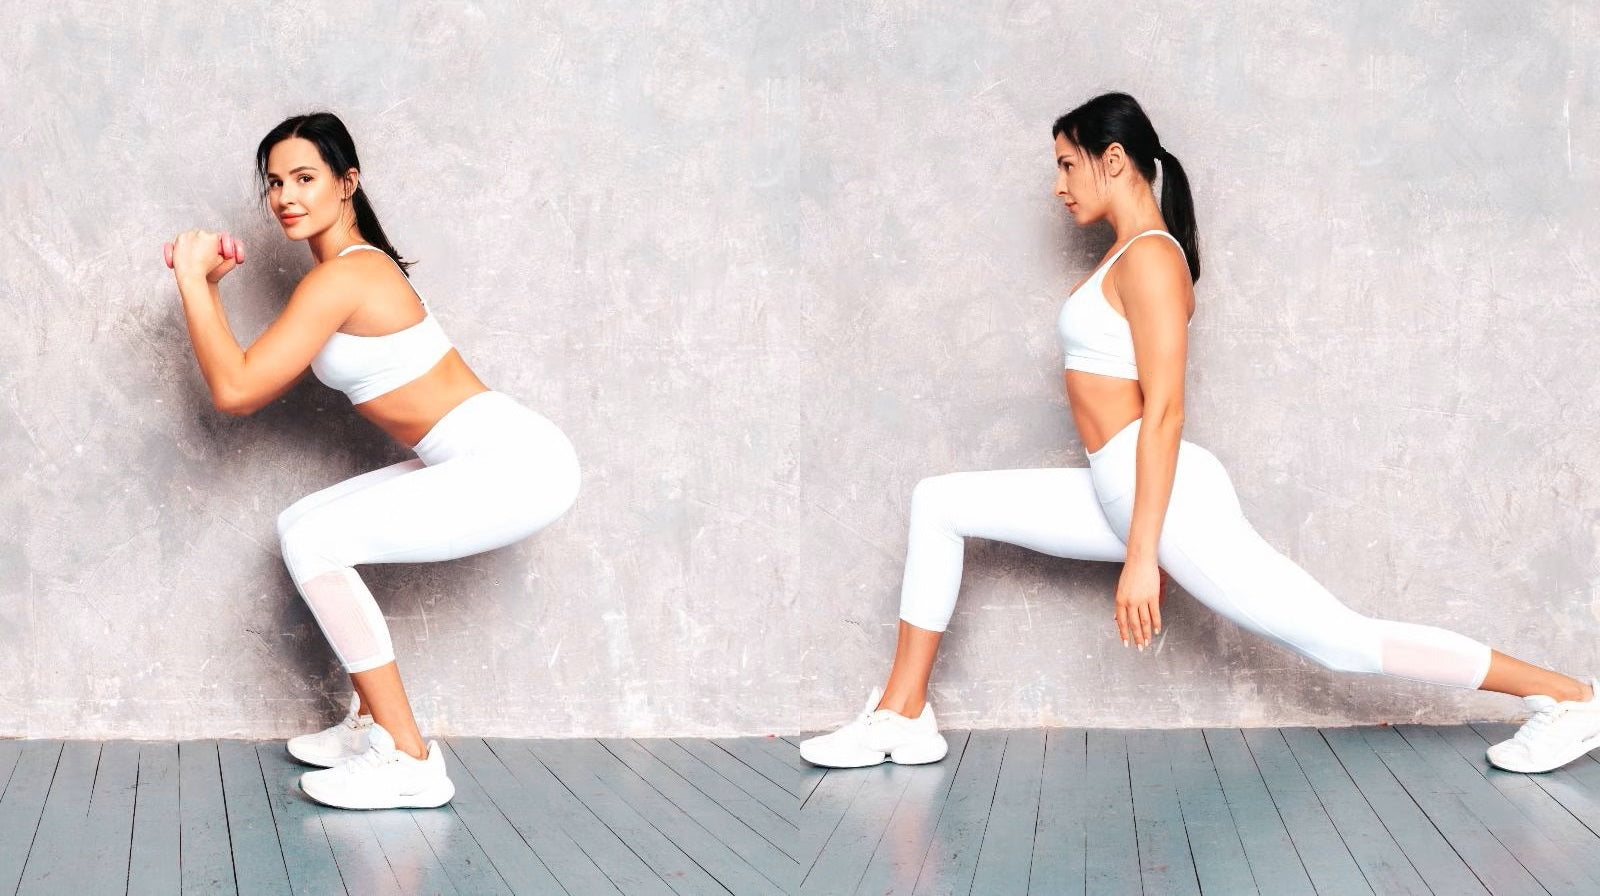 Lunges or Squats